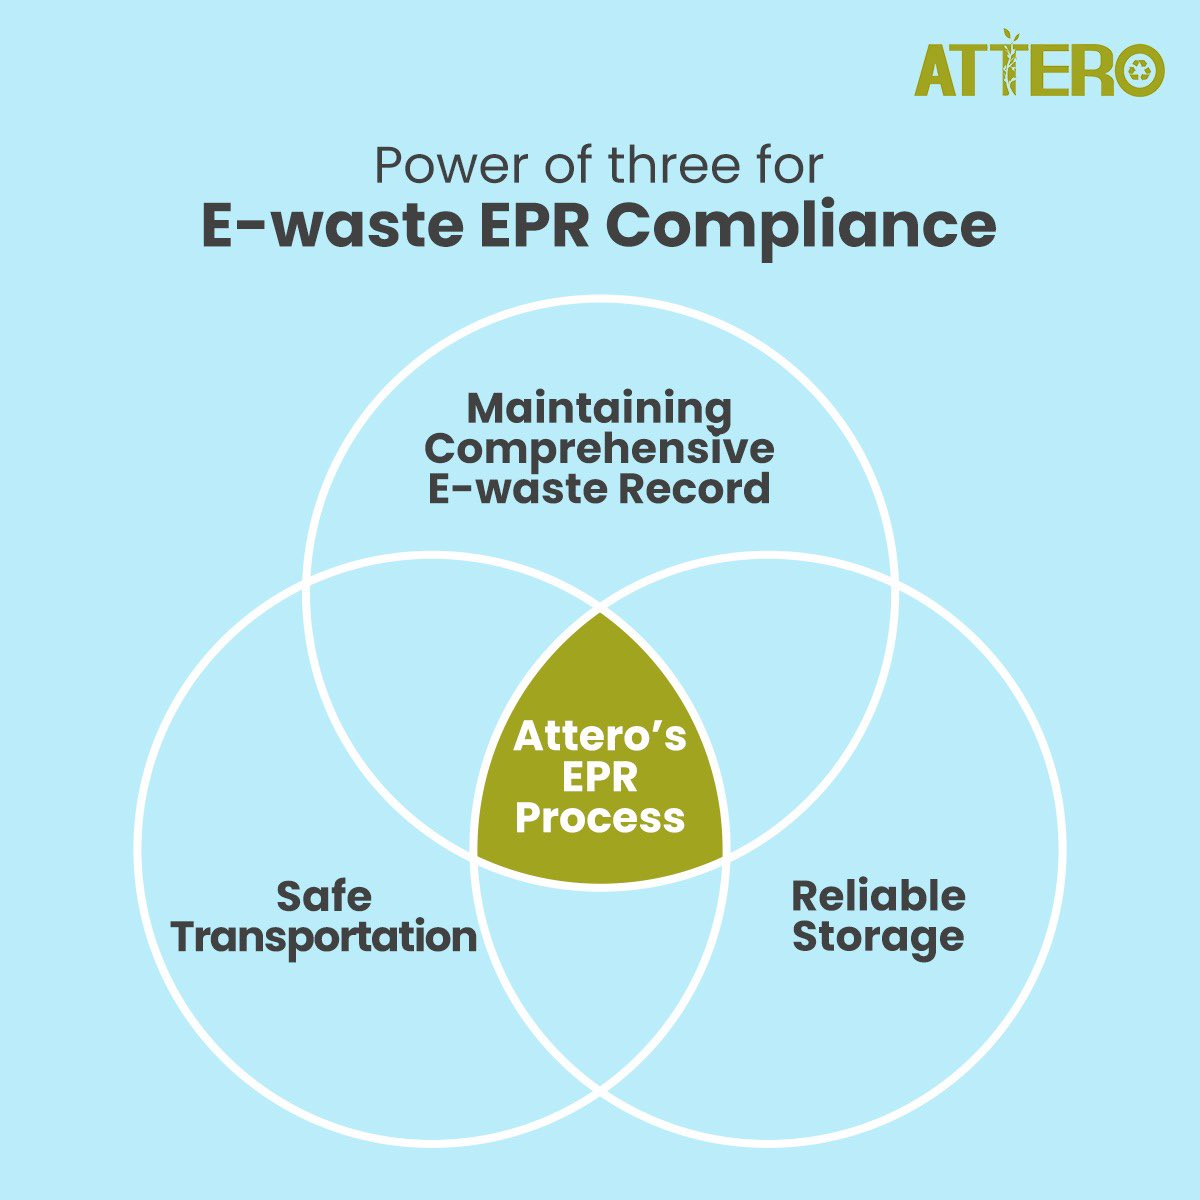 Attero's #EPR framework brings together a synergy of comprehensive, safe and reliable solutions to help you comply with e-waste recycling regulations seamlessly. So, Venn are you getting your end-of-life electronics recycled?

#Attero #AtteroRecycling #LithiumBatteries #EWaste